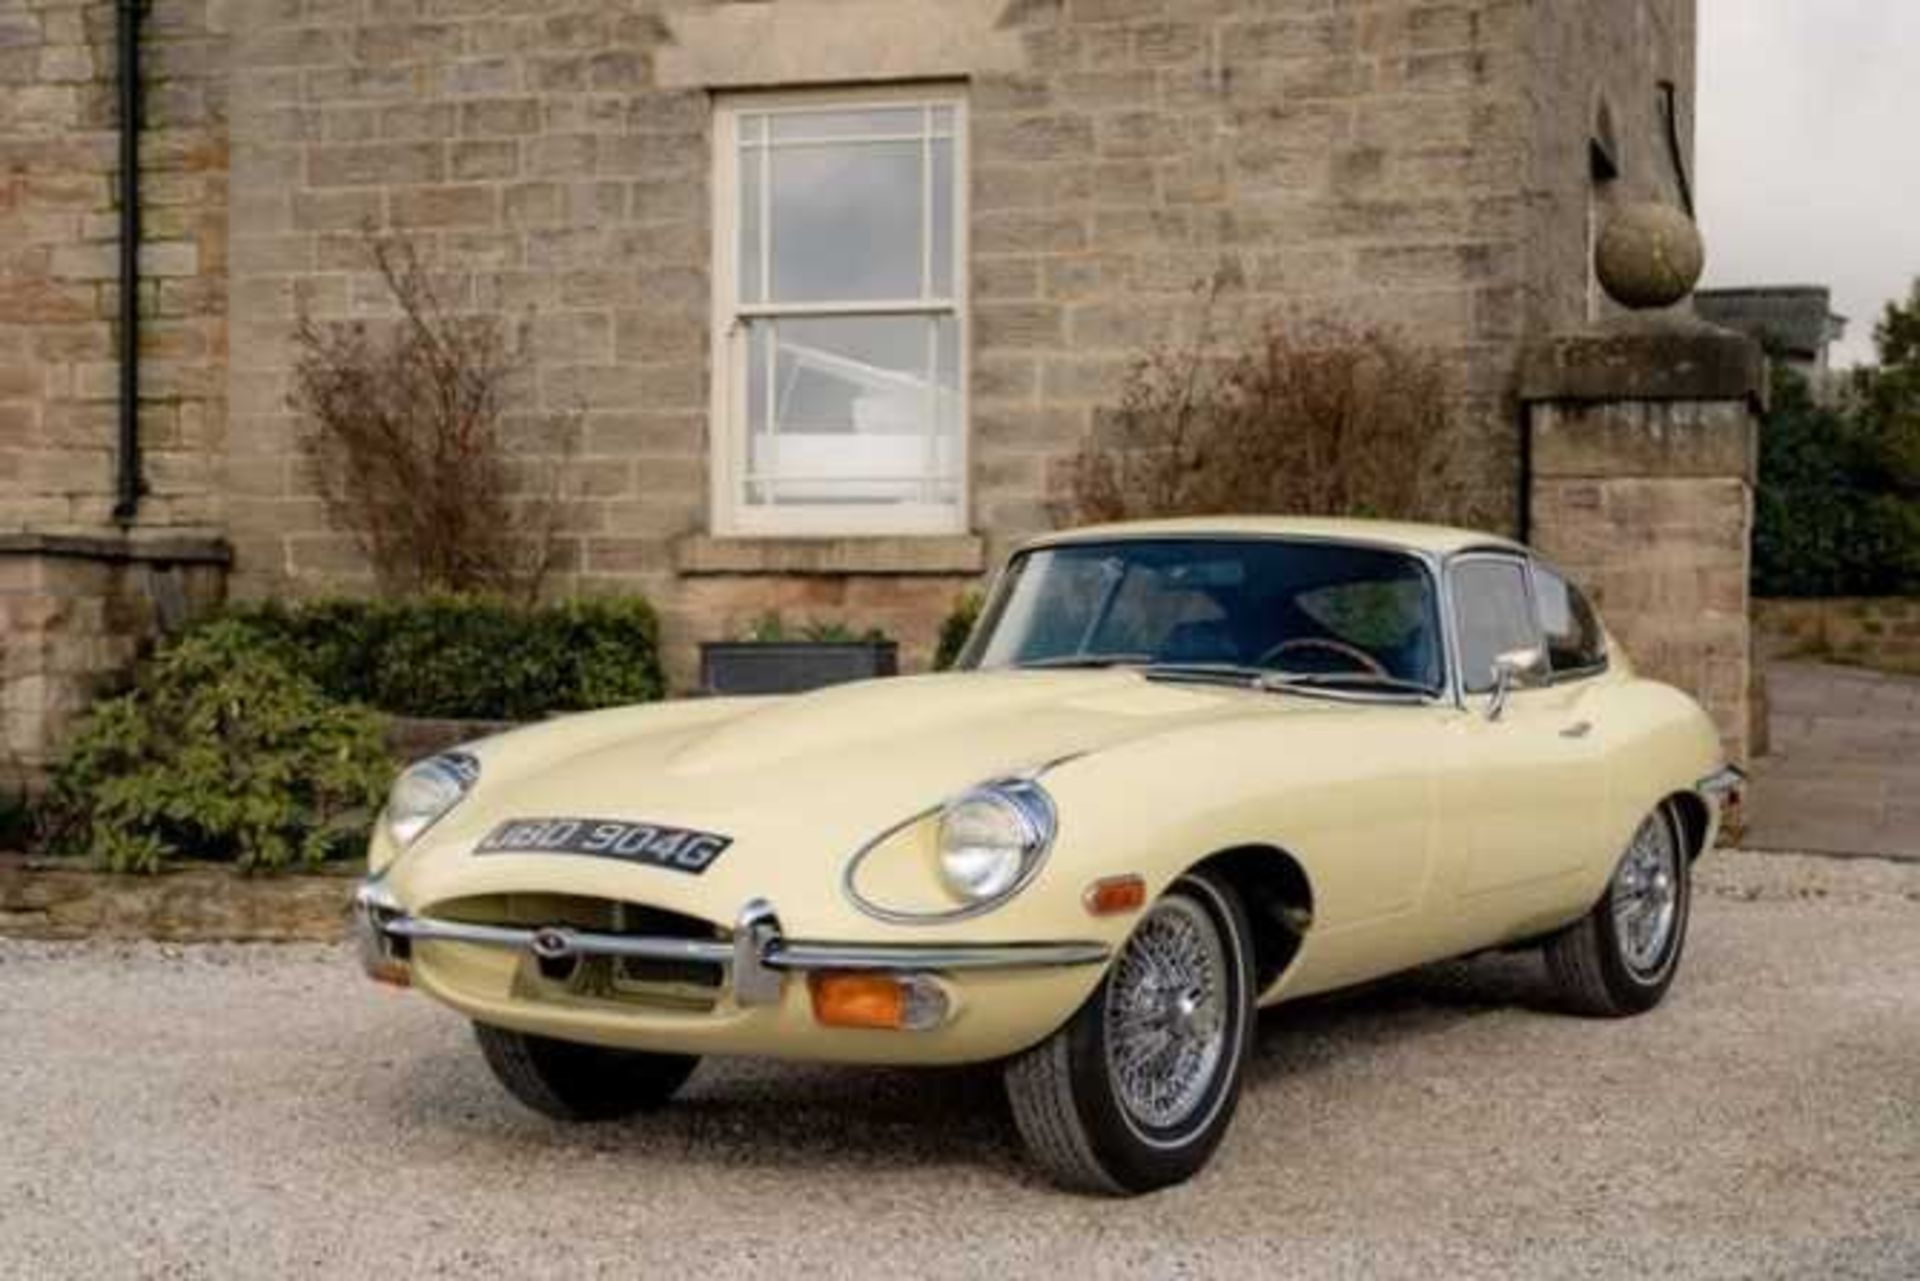 1968 Jaguar E-Type 4.2 Litre Coupe Genuine 44,000 miles from new - Image 33 of 68